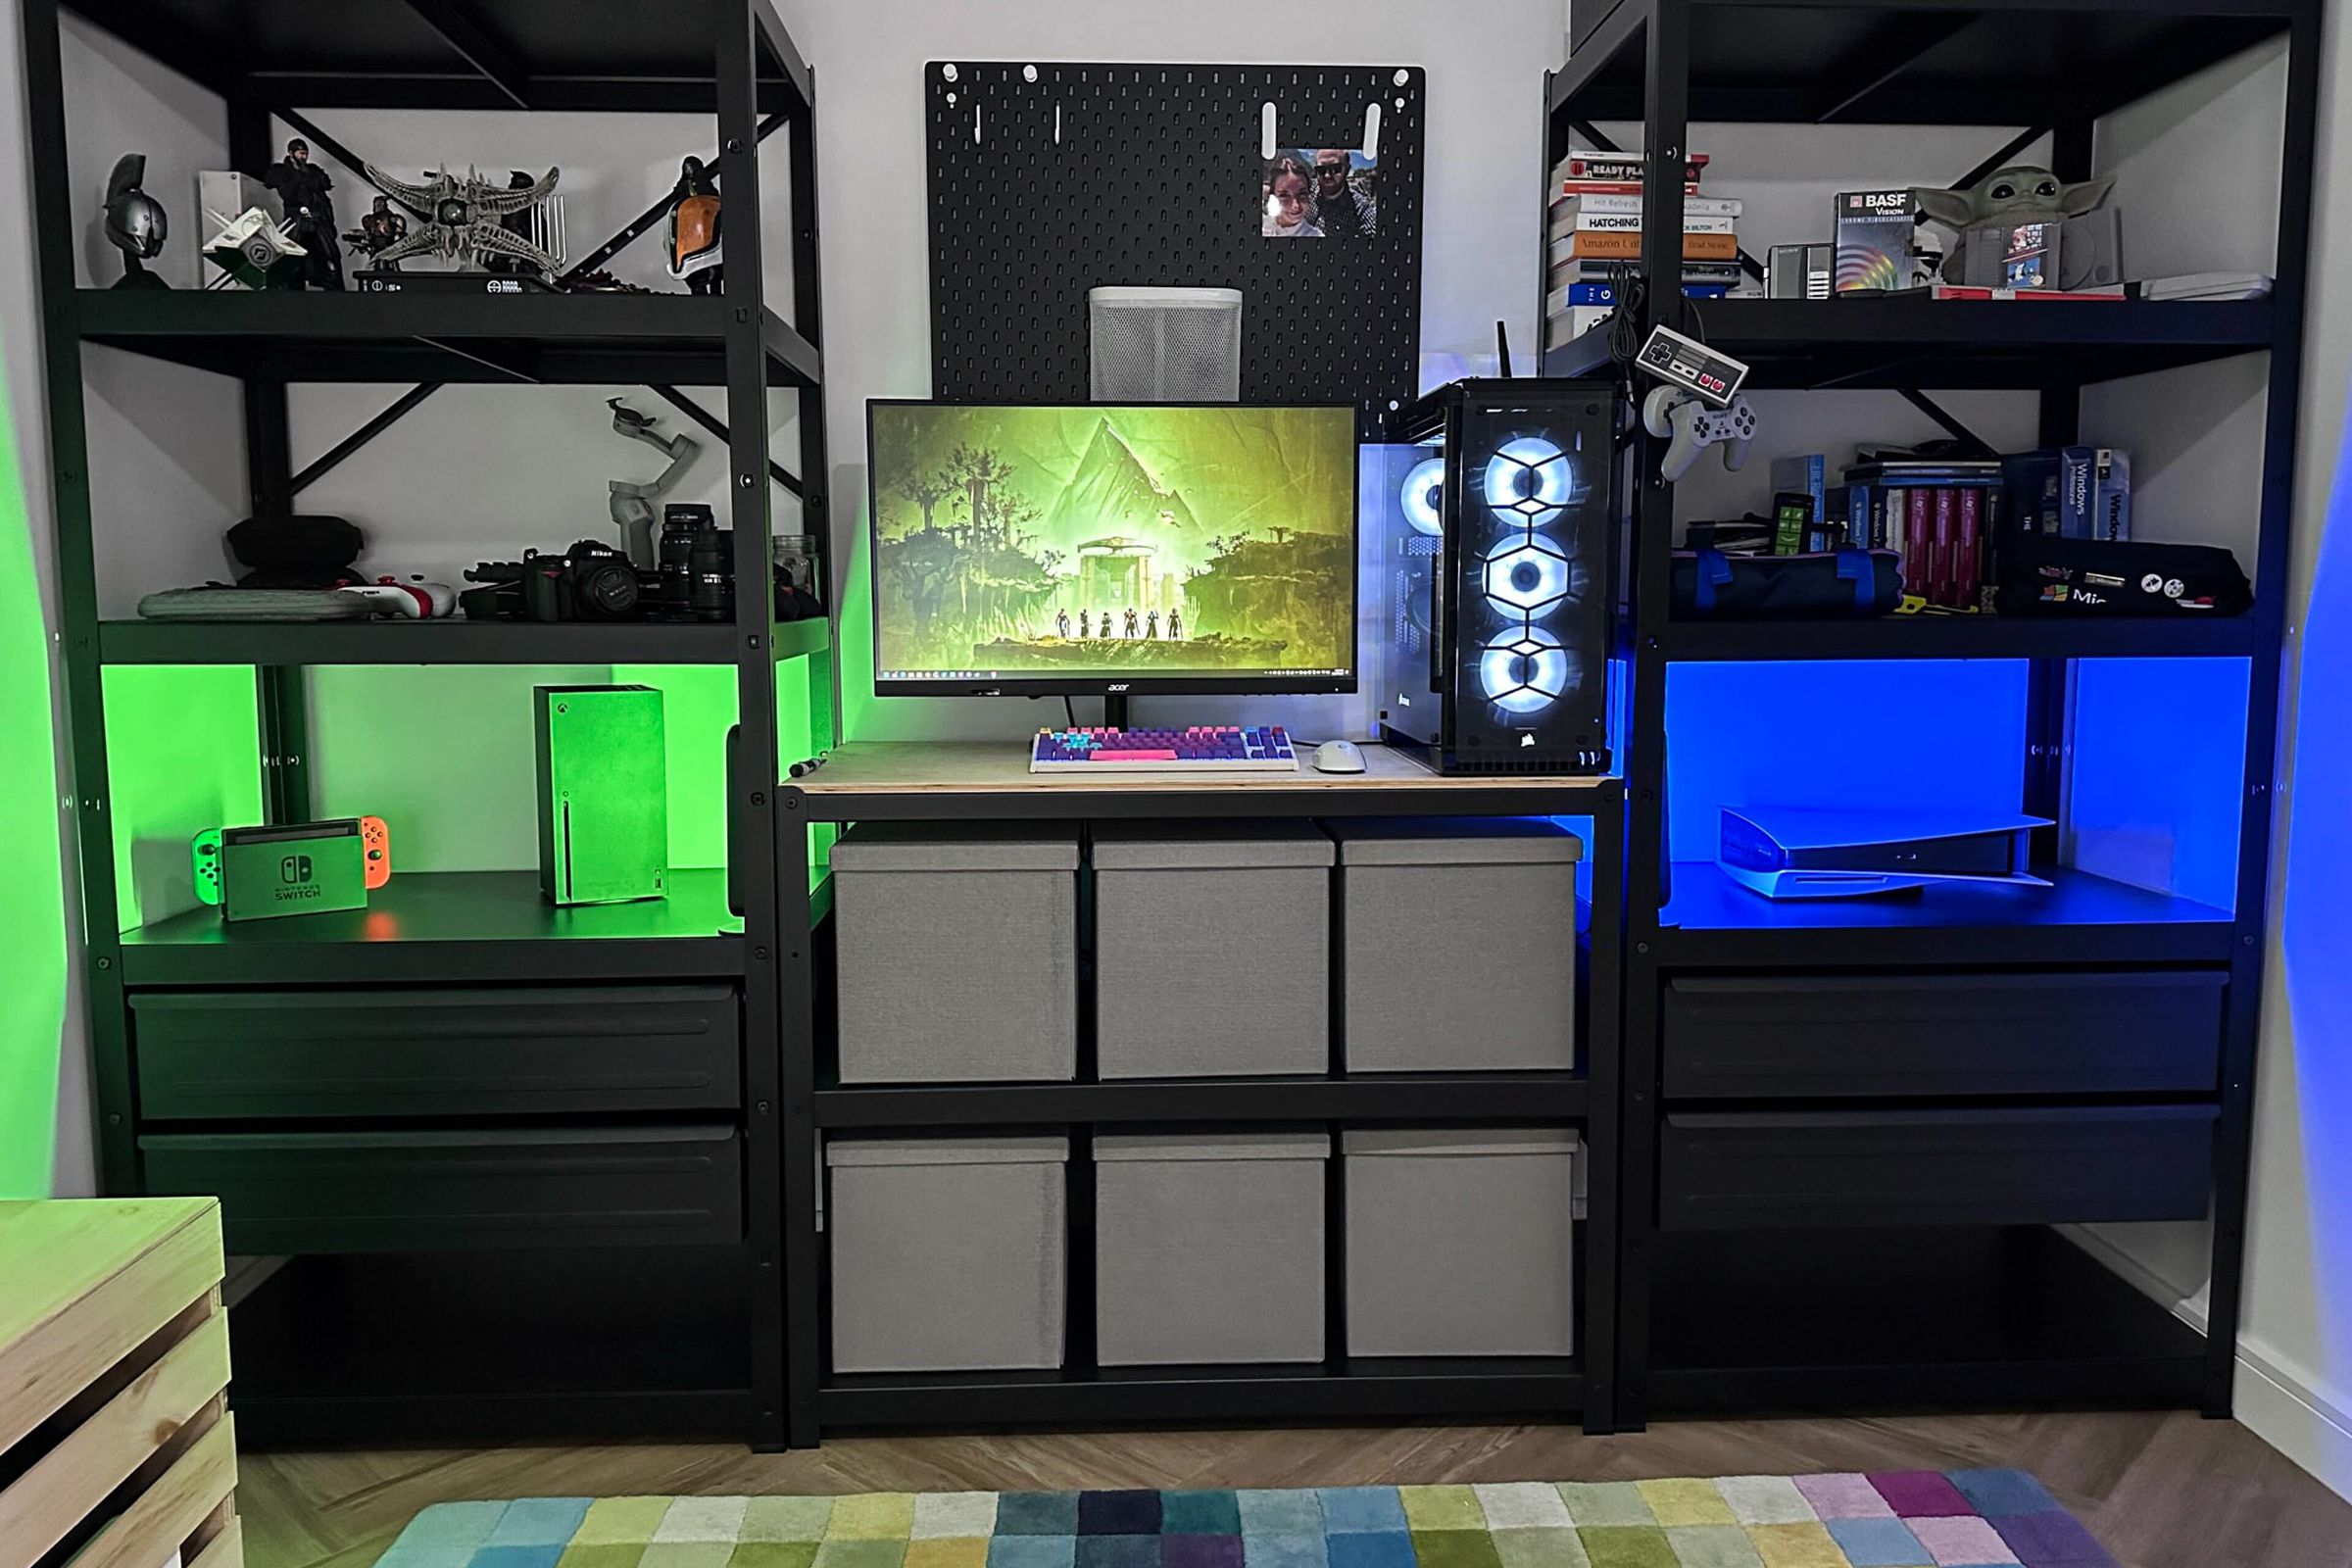 A tabletop with a monitor and PC; shelves on either side hold a variety of tech; the left shelf has a green light while the right shelf has a blue light.